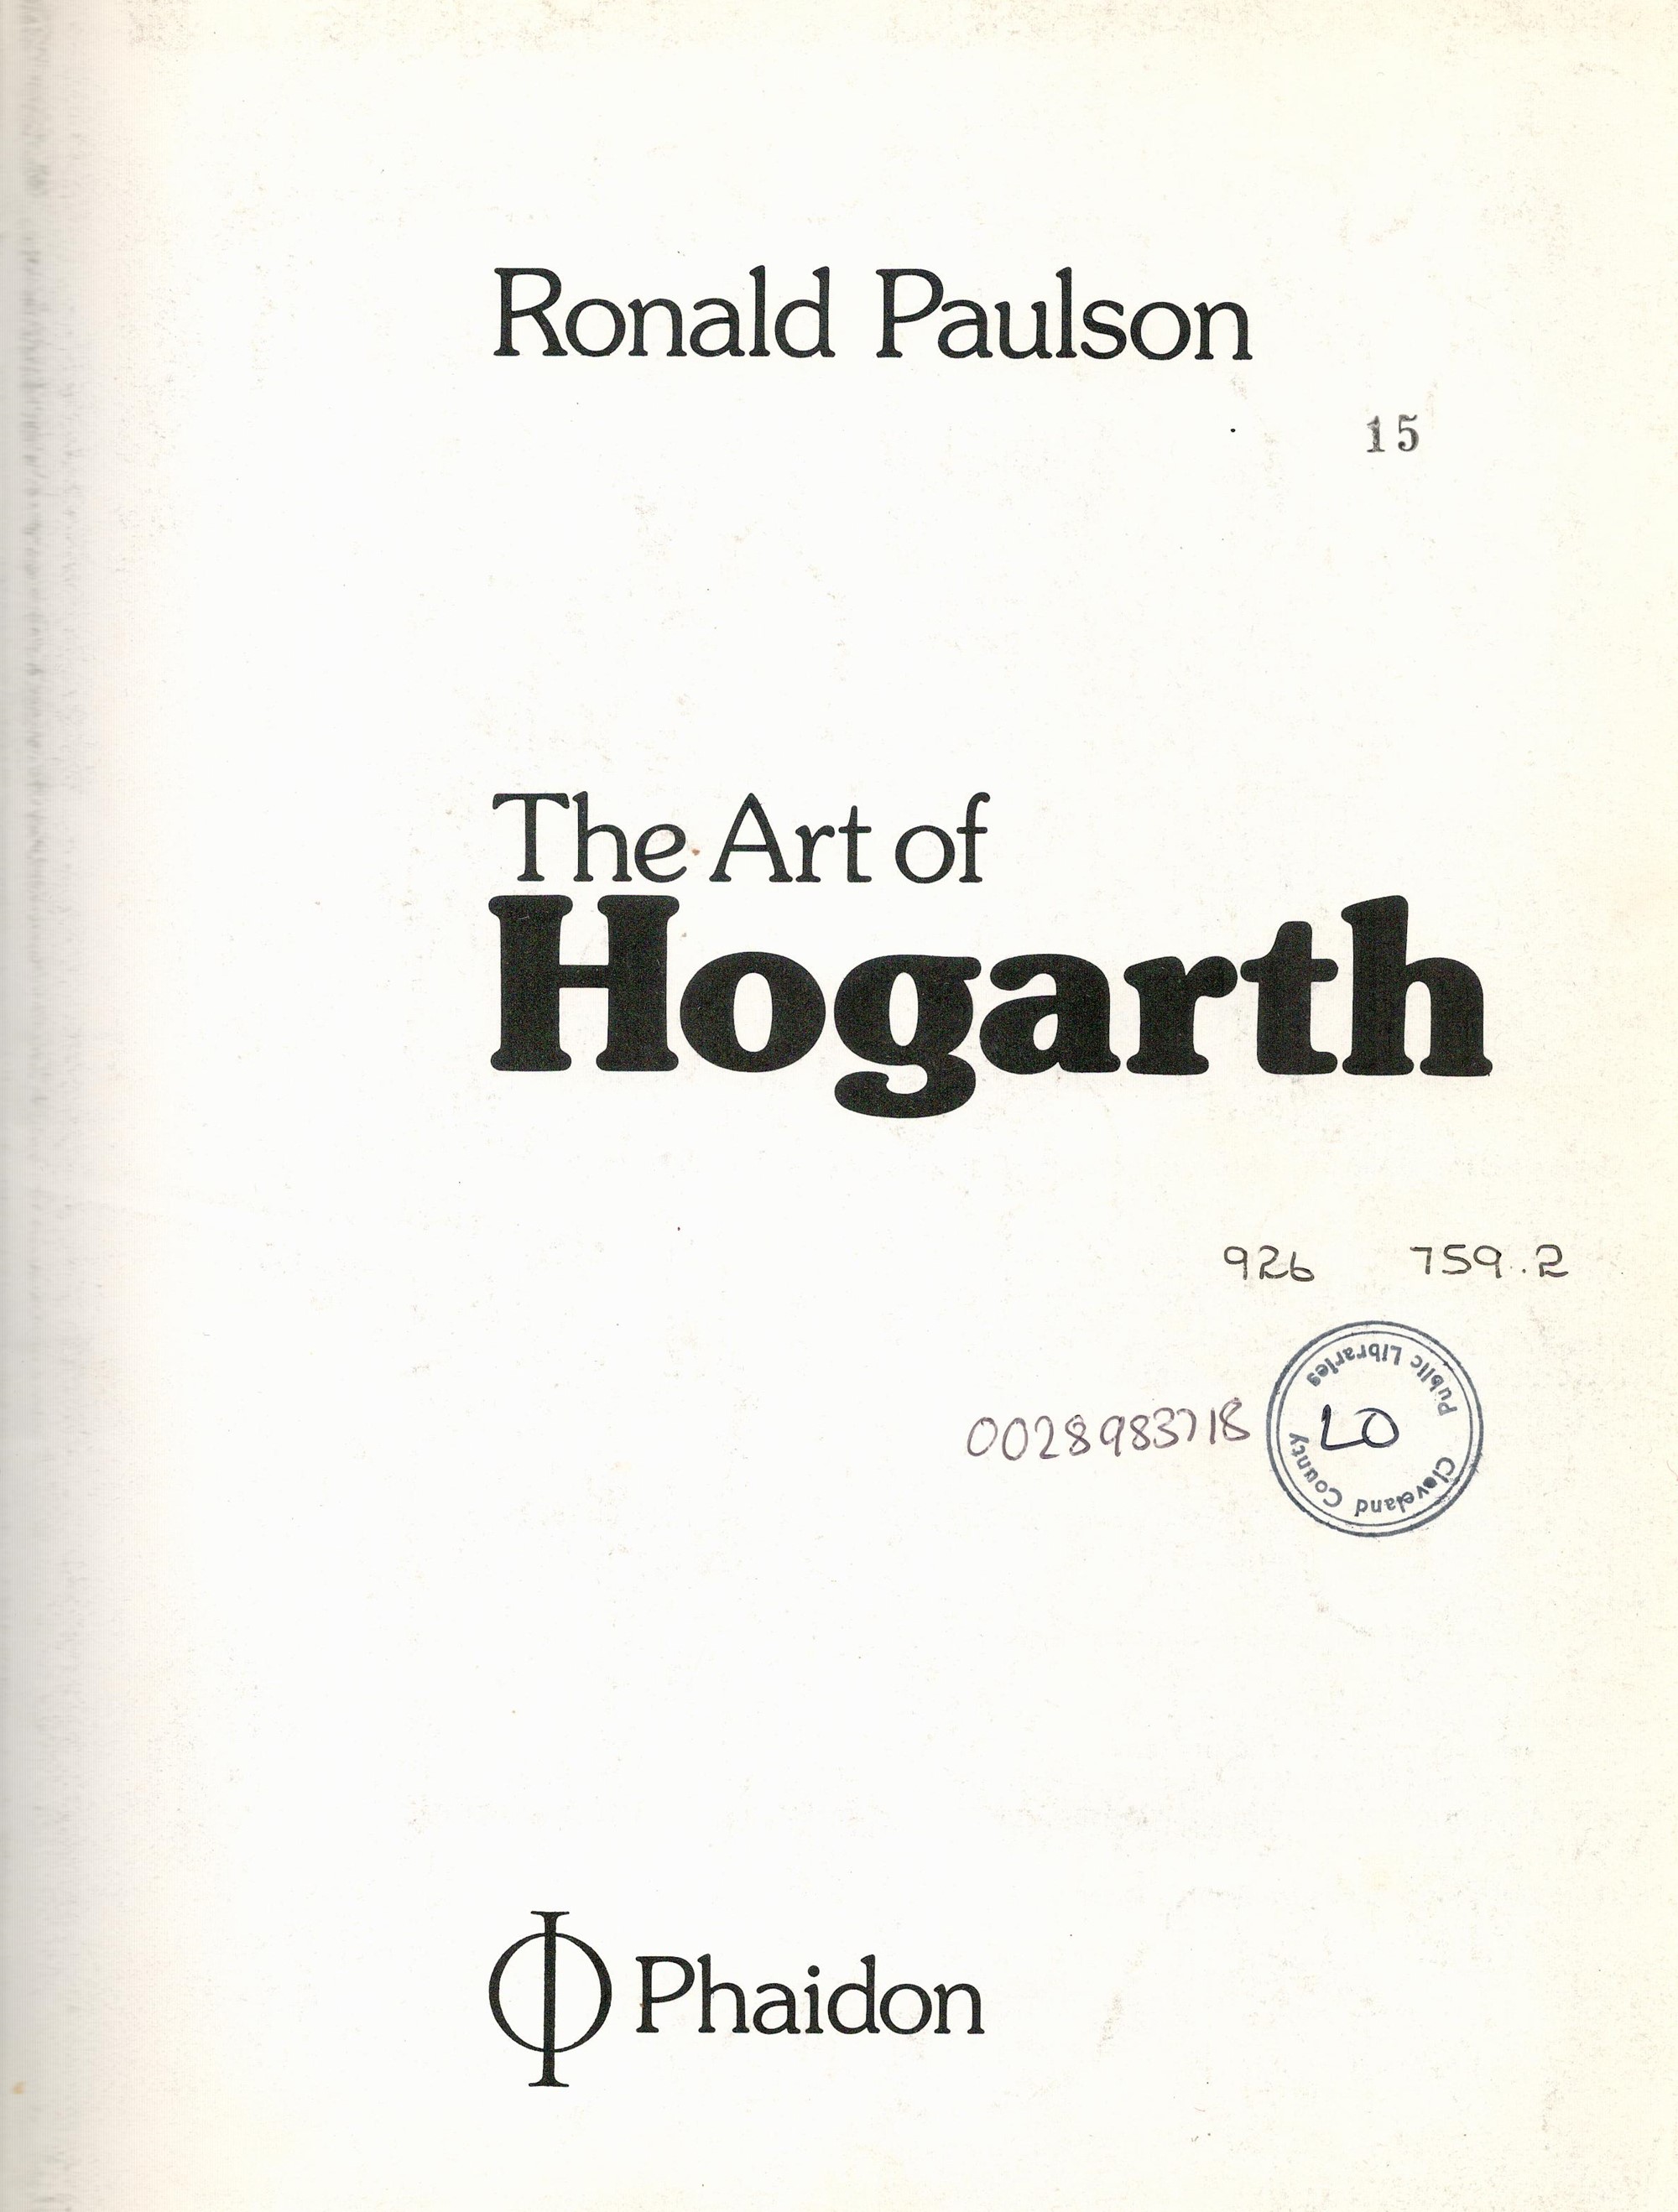 The Art of Hogarth by Ronald Paulson First Edition 1975 Hardback Book published by Phaidon Press Ltd - Image 4 of 6